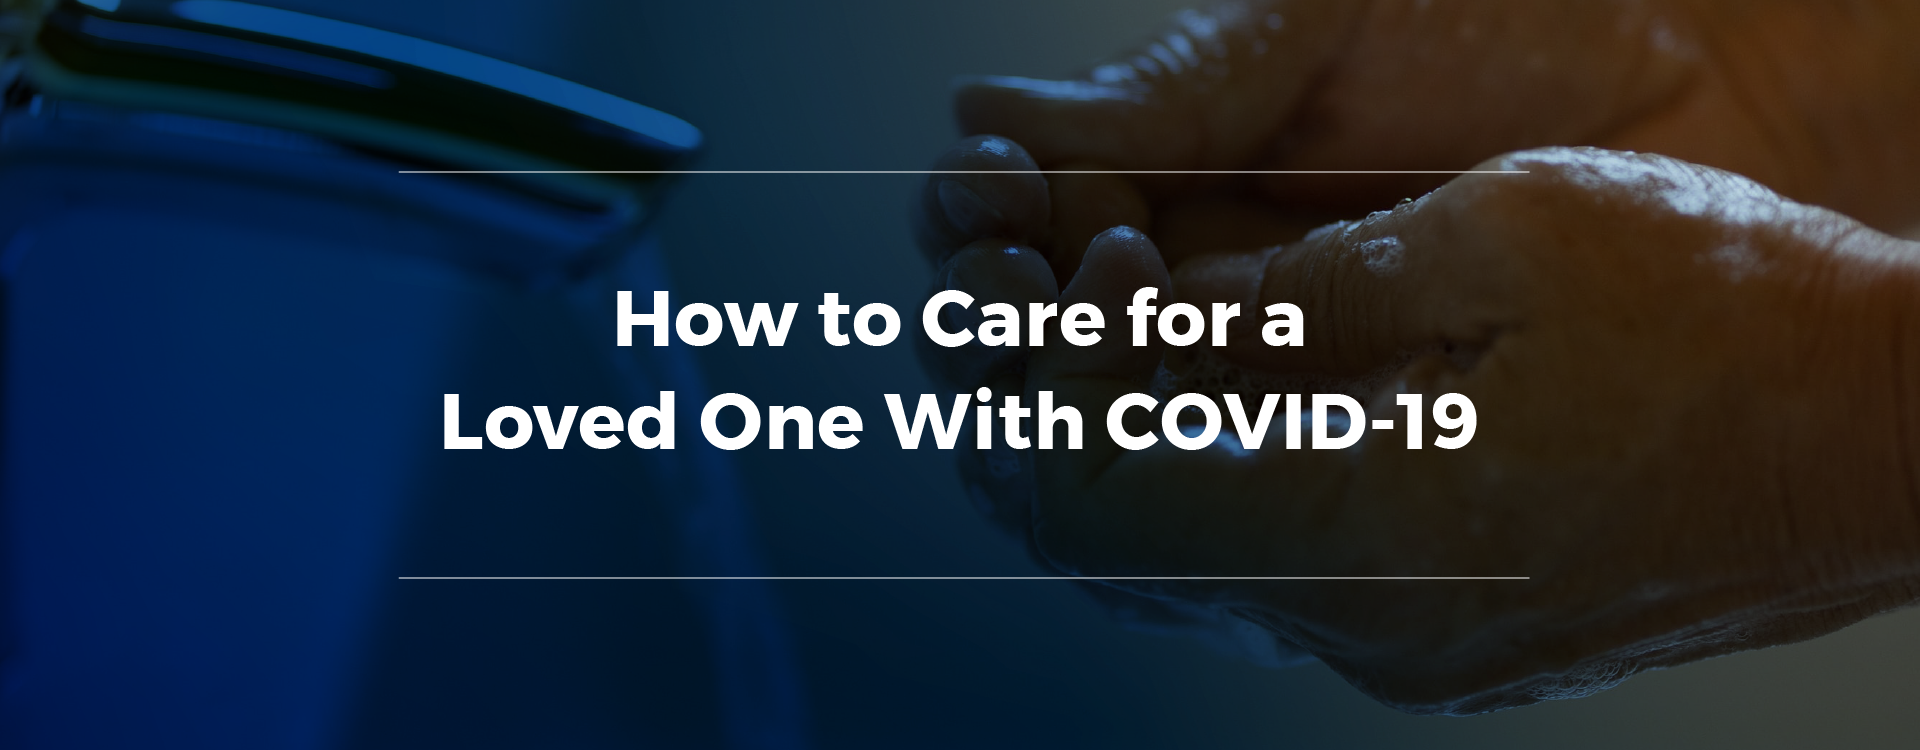 How to Care for a Loved One With COVID-19